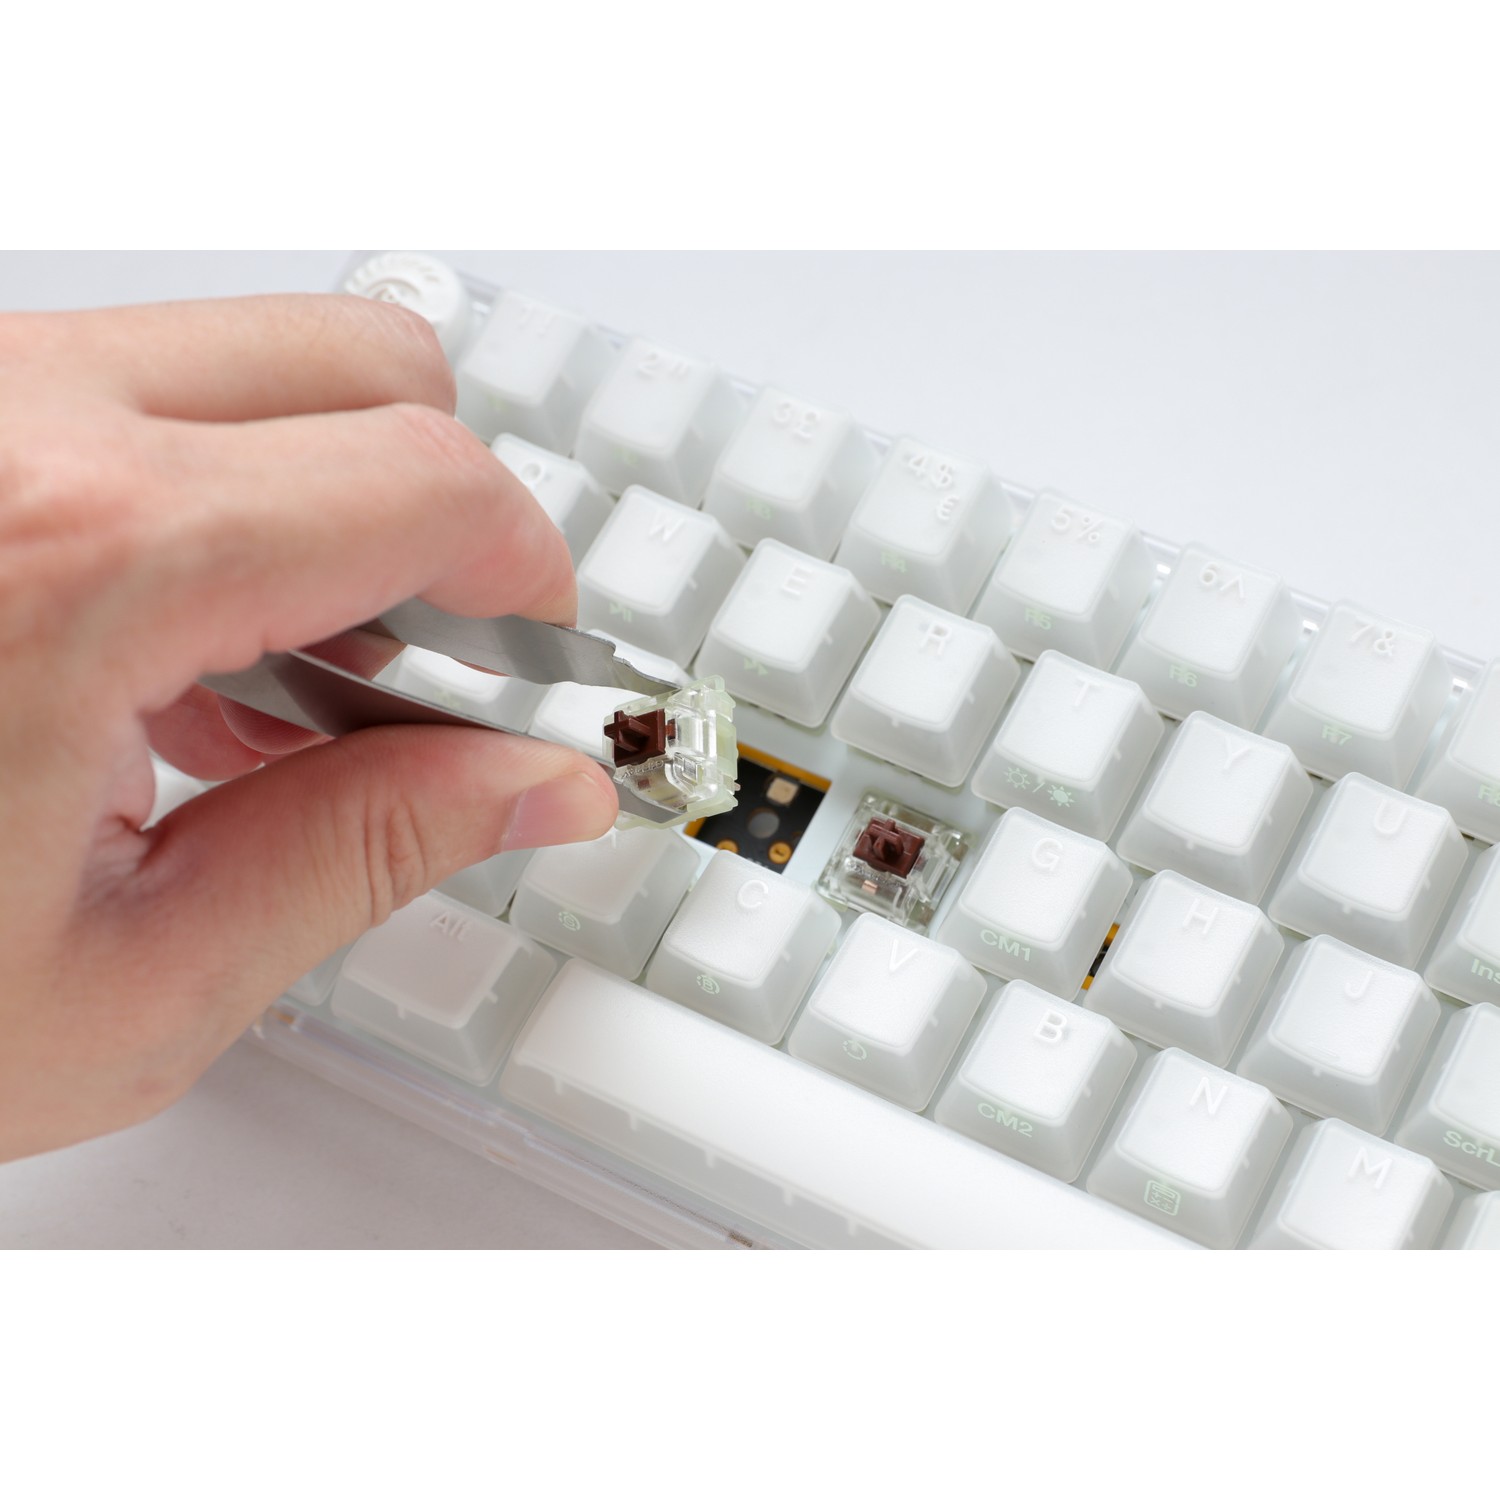 Ducky - Ducky One 3 Aura SF 65% Mechanical Gaming Keyboard White Frame Kailh Box Jellyfish Switch Y UK Layout